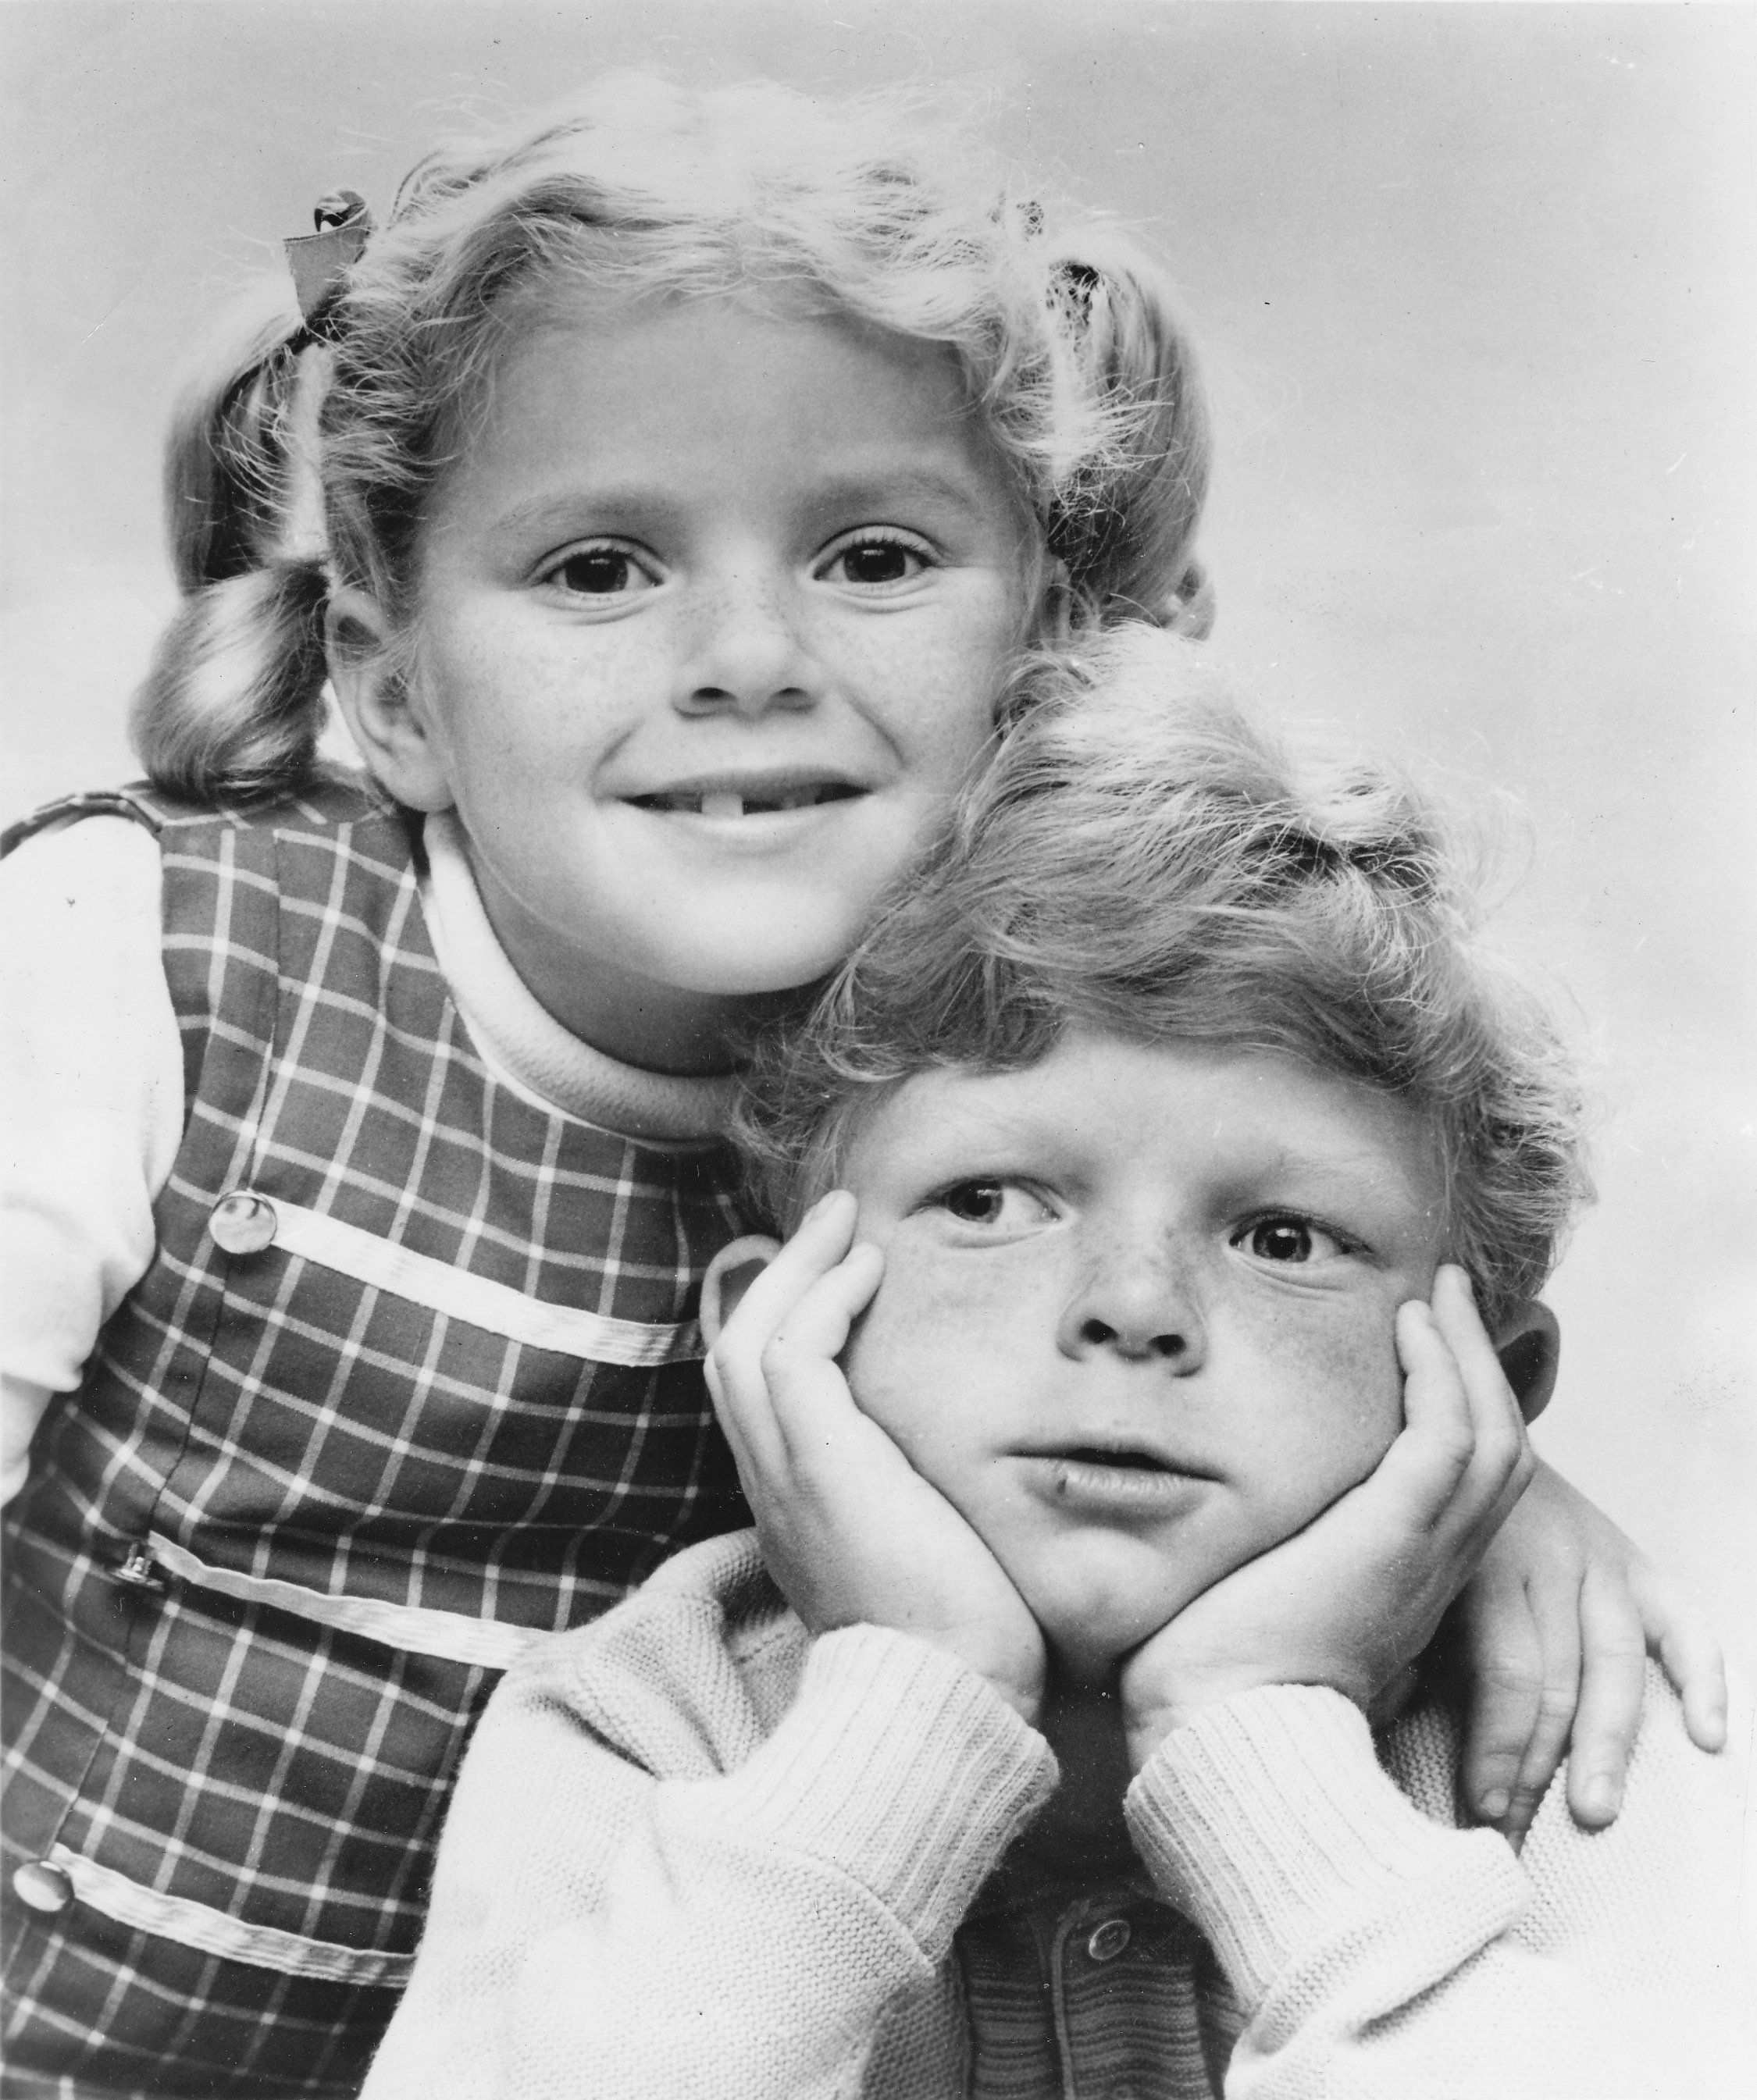 American child actors, Anissa Jones and Johnny Whitaker promoting the CBS comedy series "Family Affair" circa 1967| Getty Images